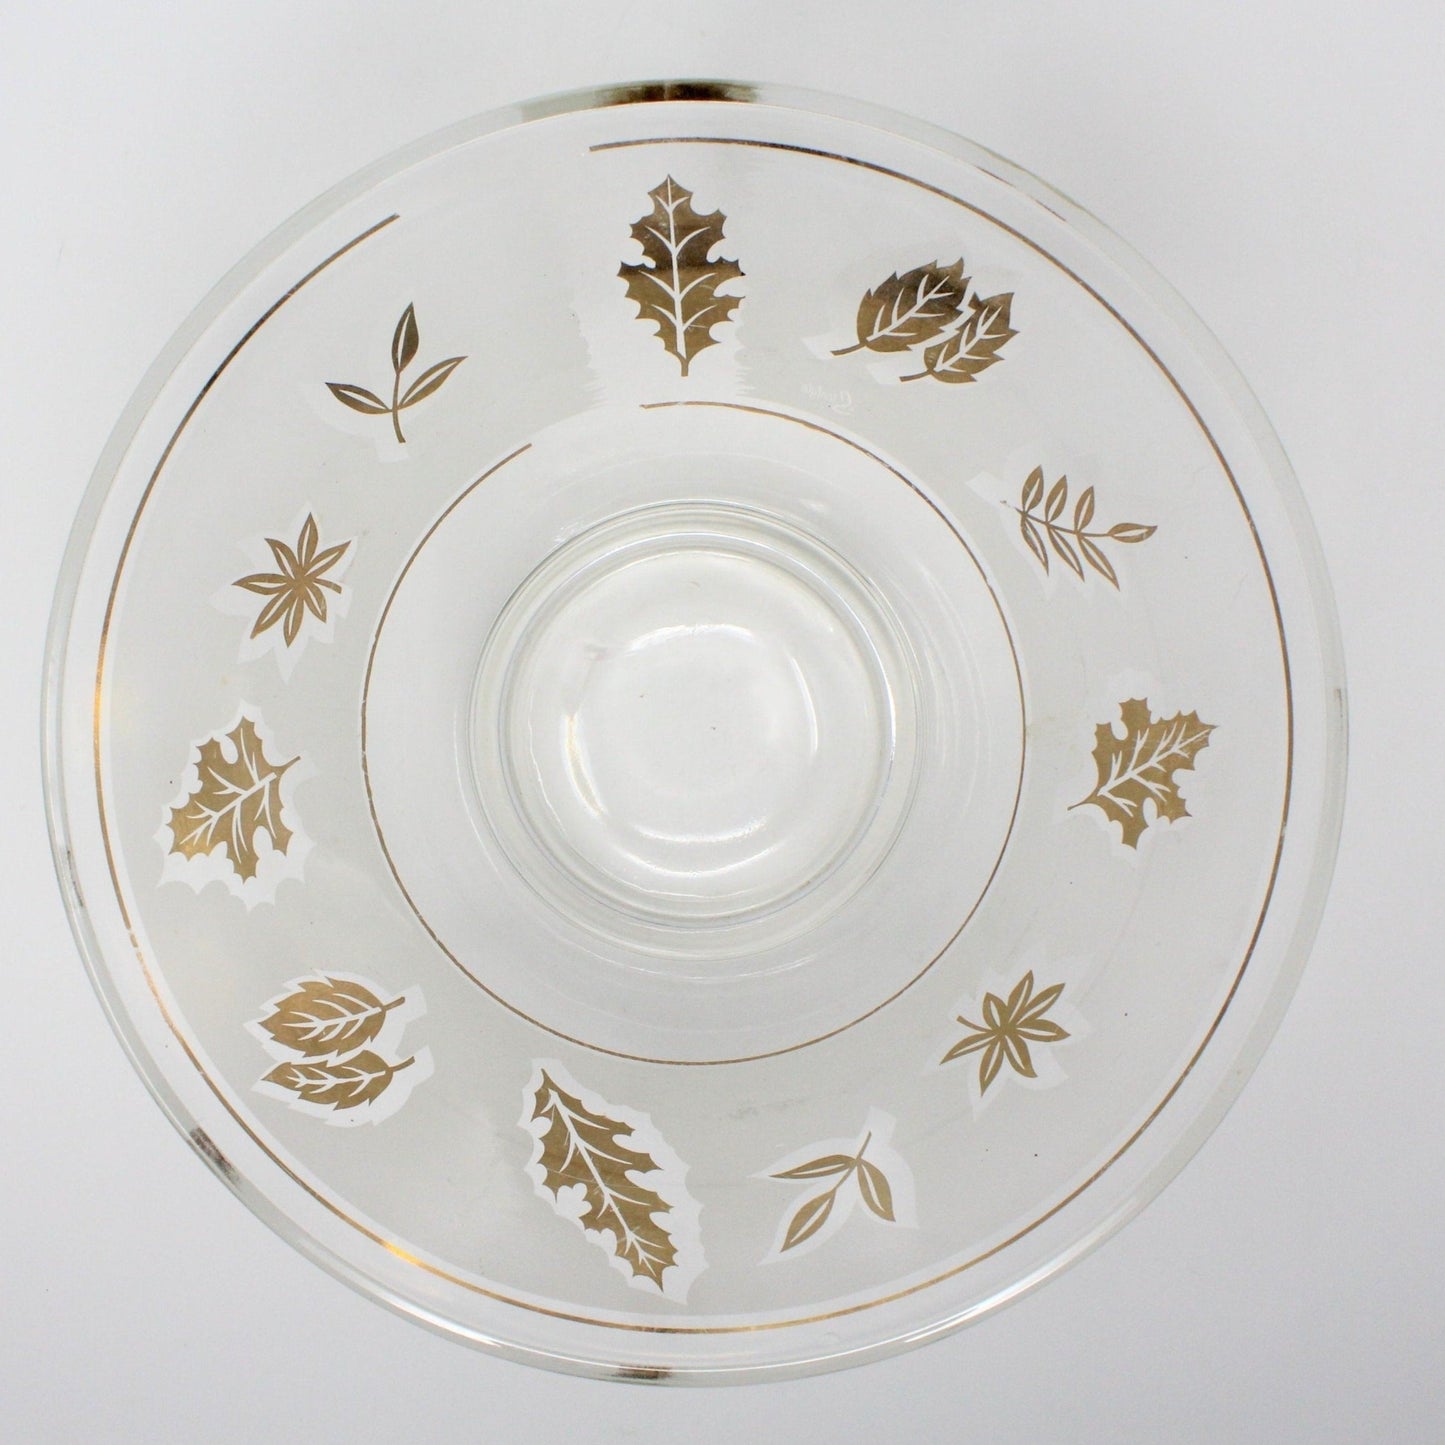 Bowl, Starlyte, Golden Foliage, Frosted Glass, Vintage